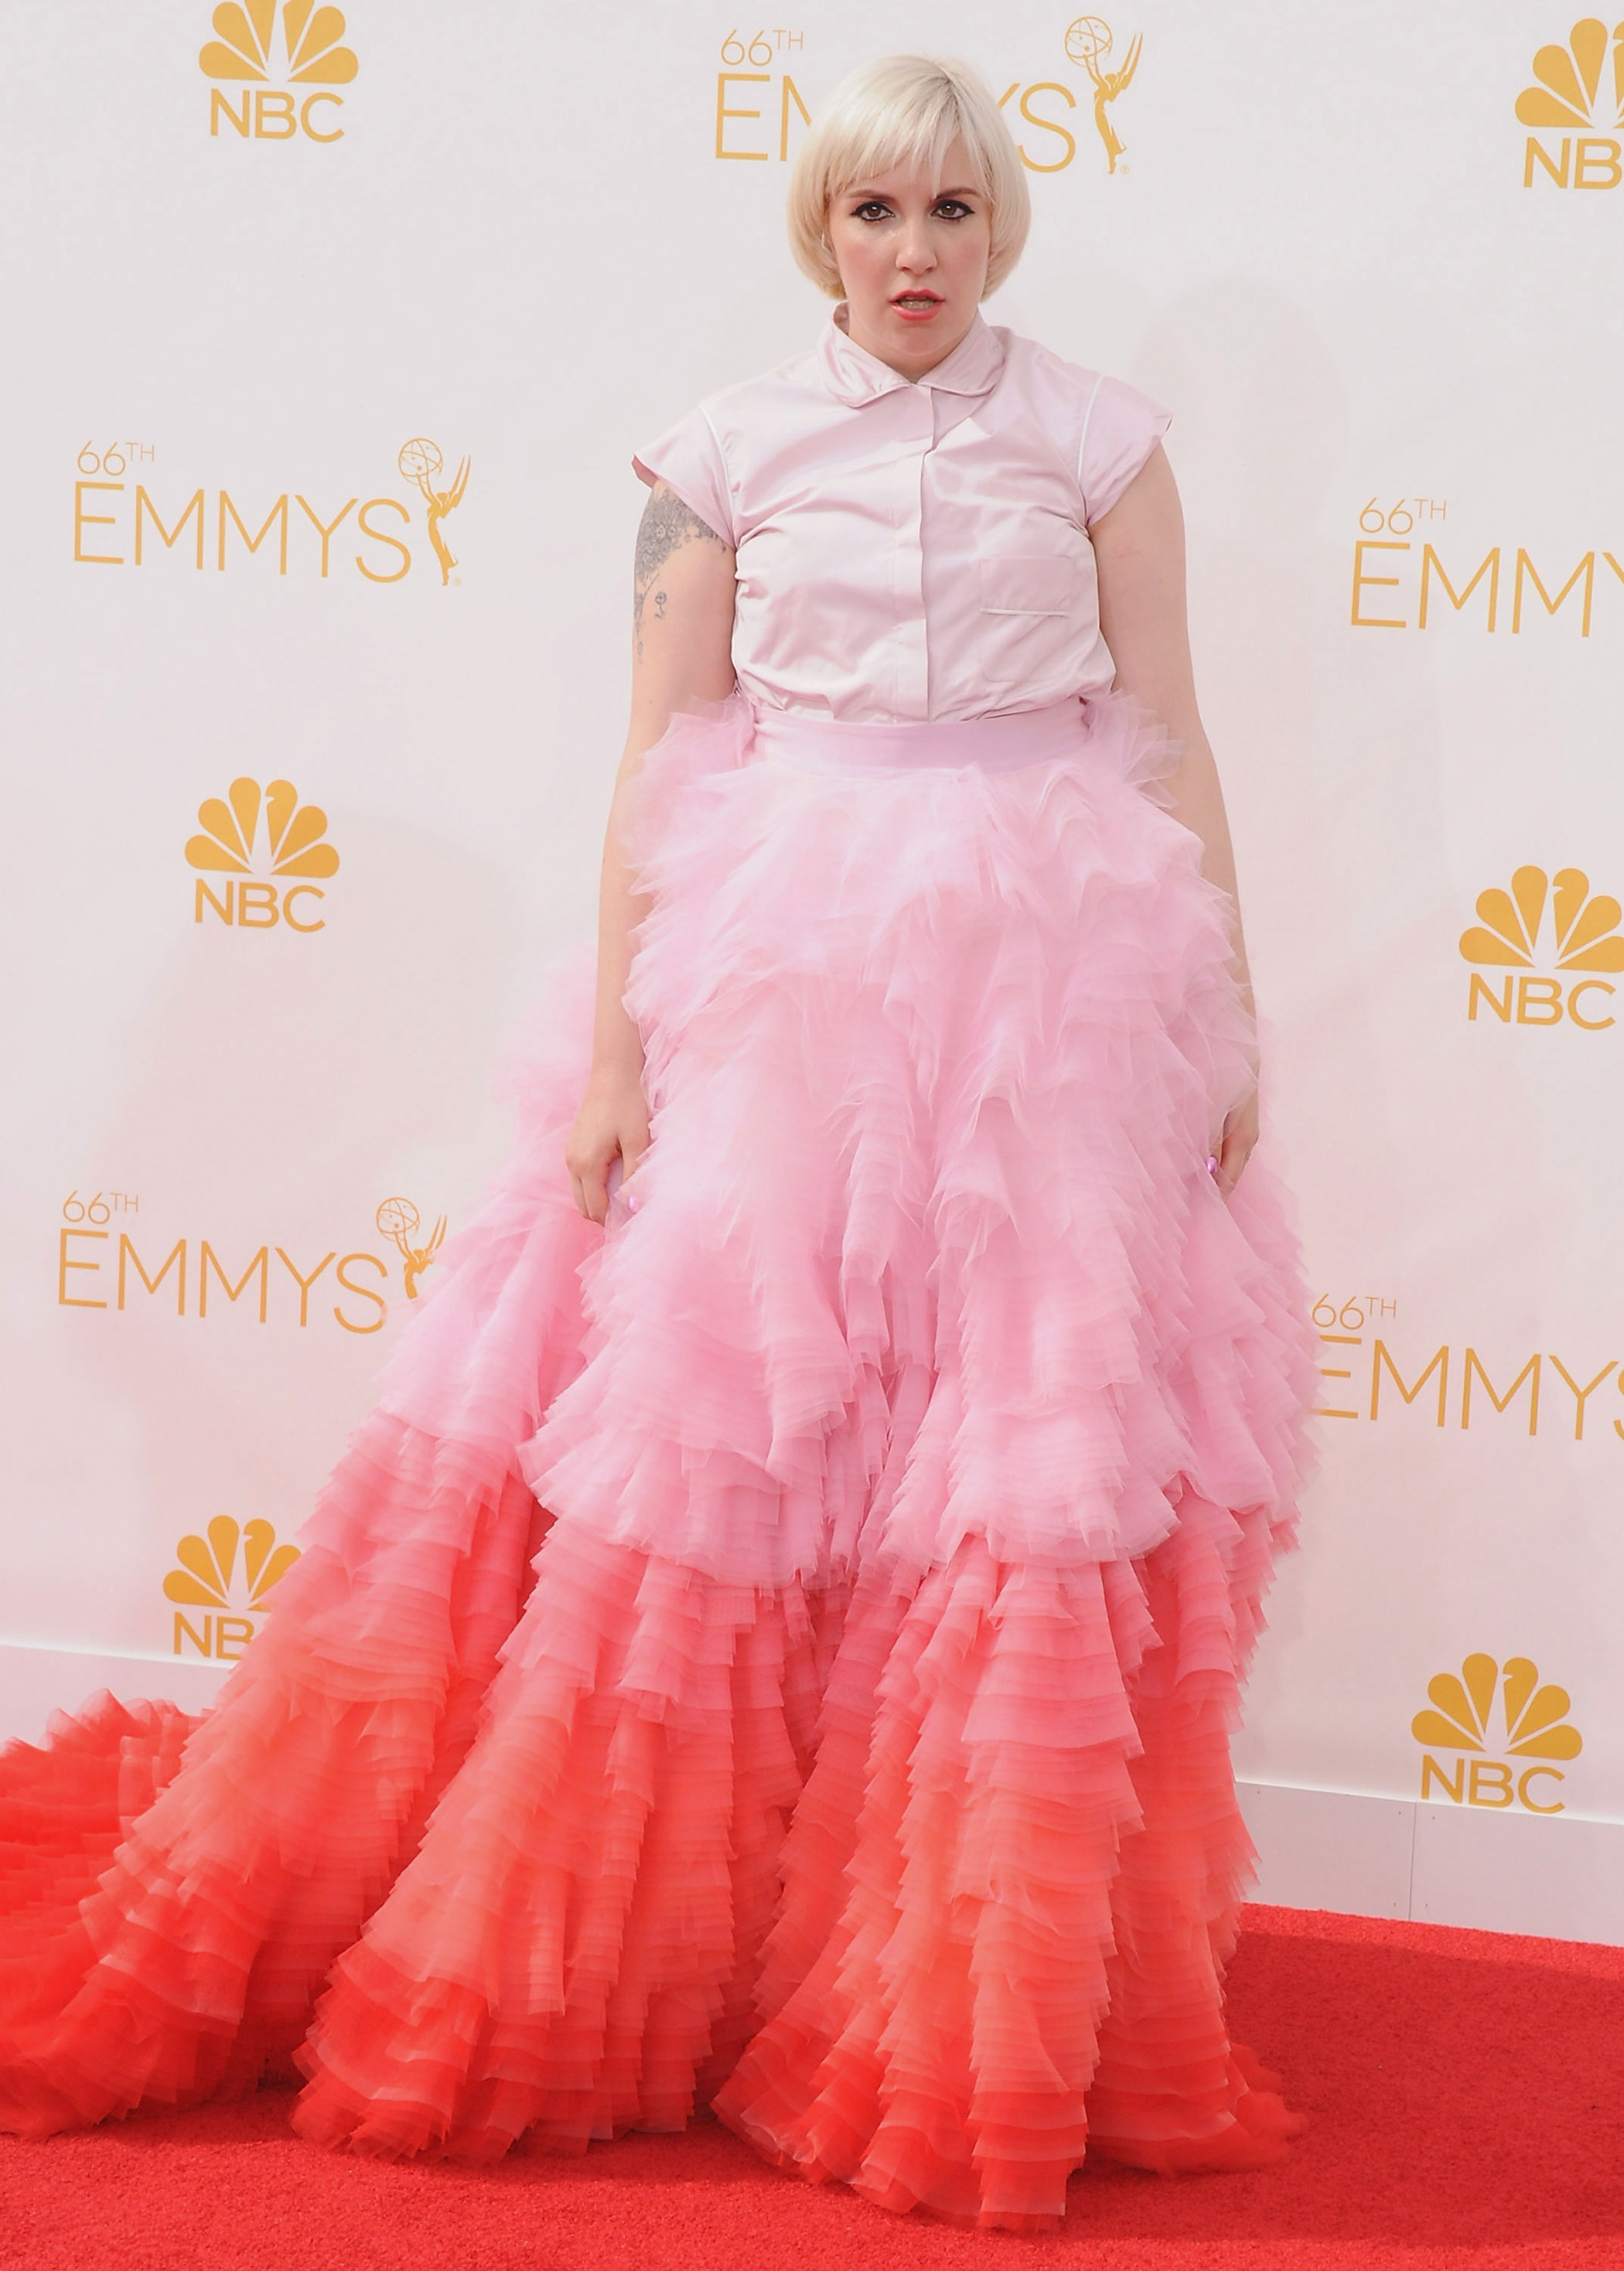 Lena Dunham in a pink tutu dress at the 66th Annual Primetime Emmy Awards on Aug. 25, 2014 in Los Angeles.